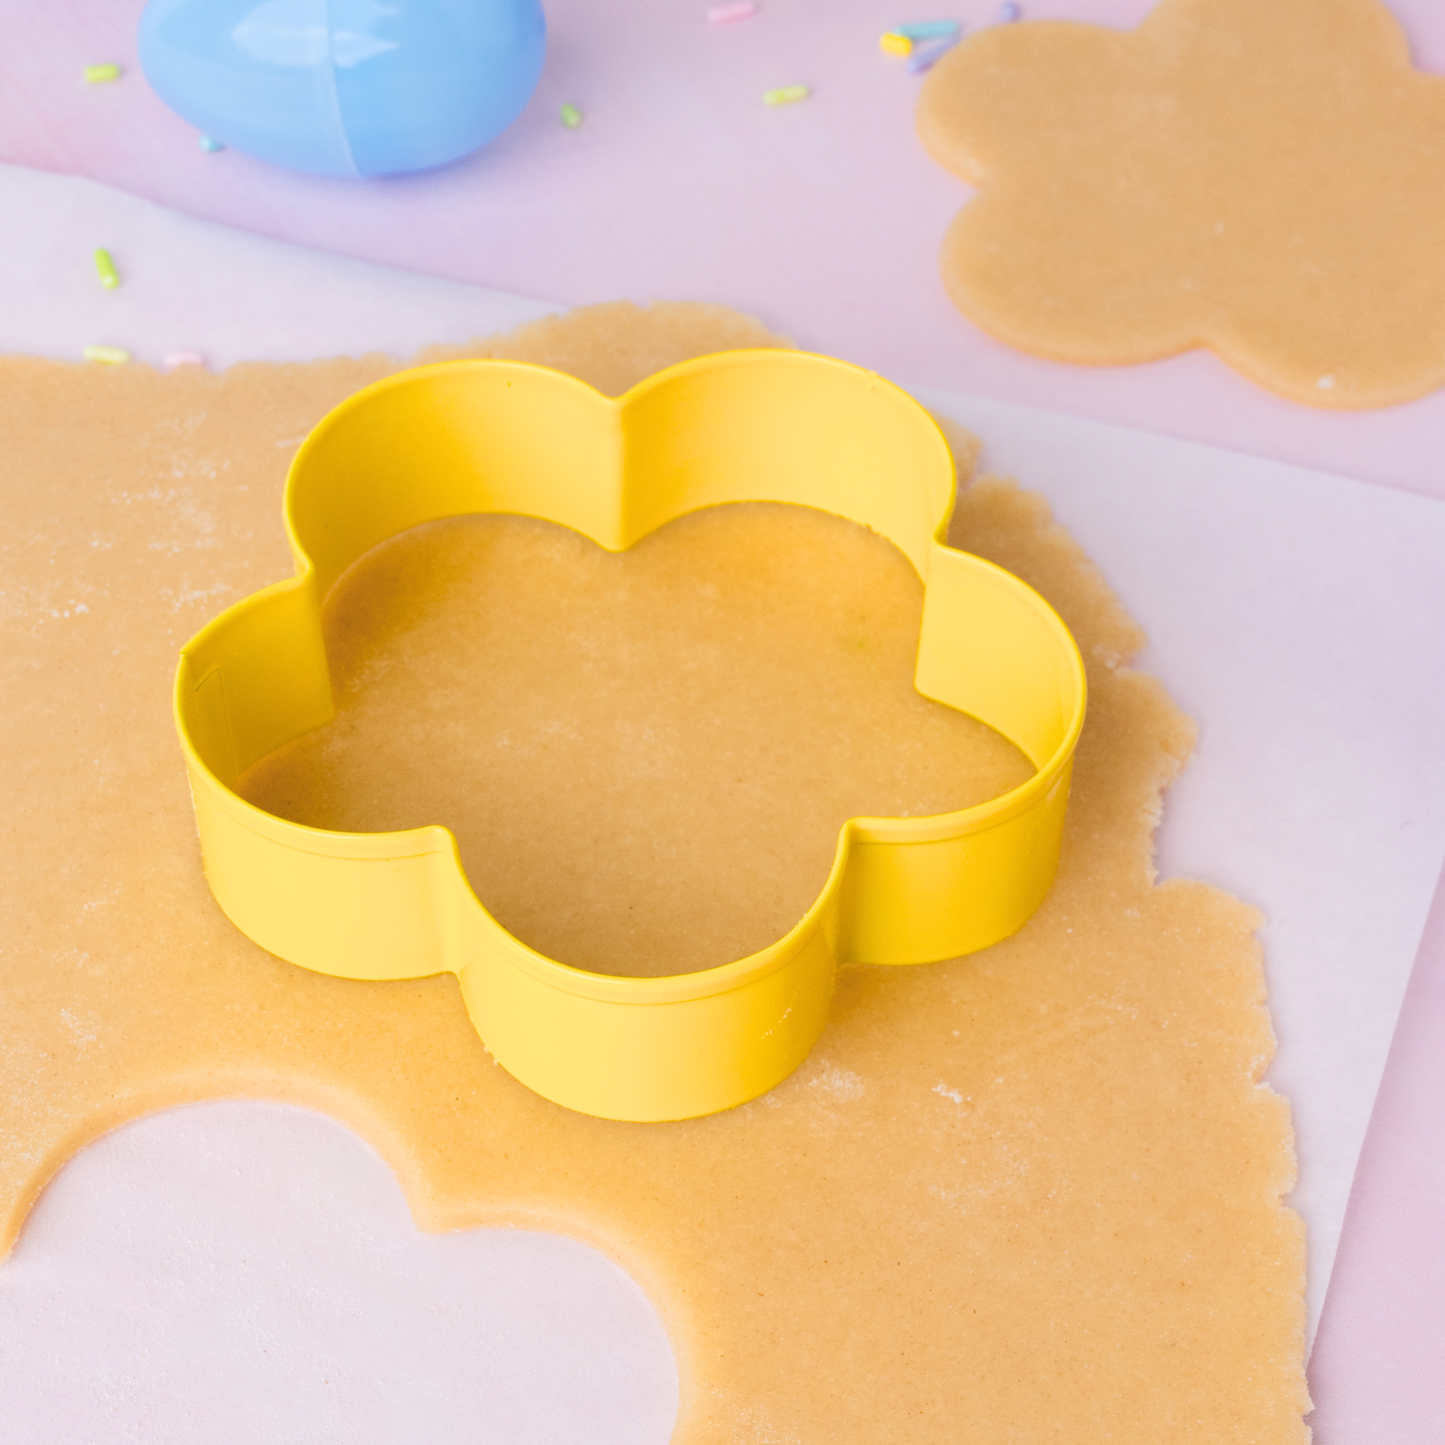 Colorful Flower Cookie Cutter